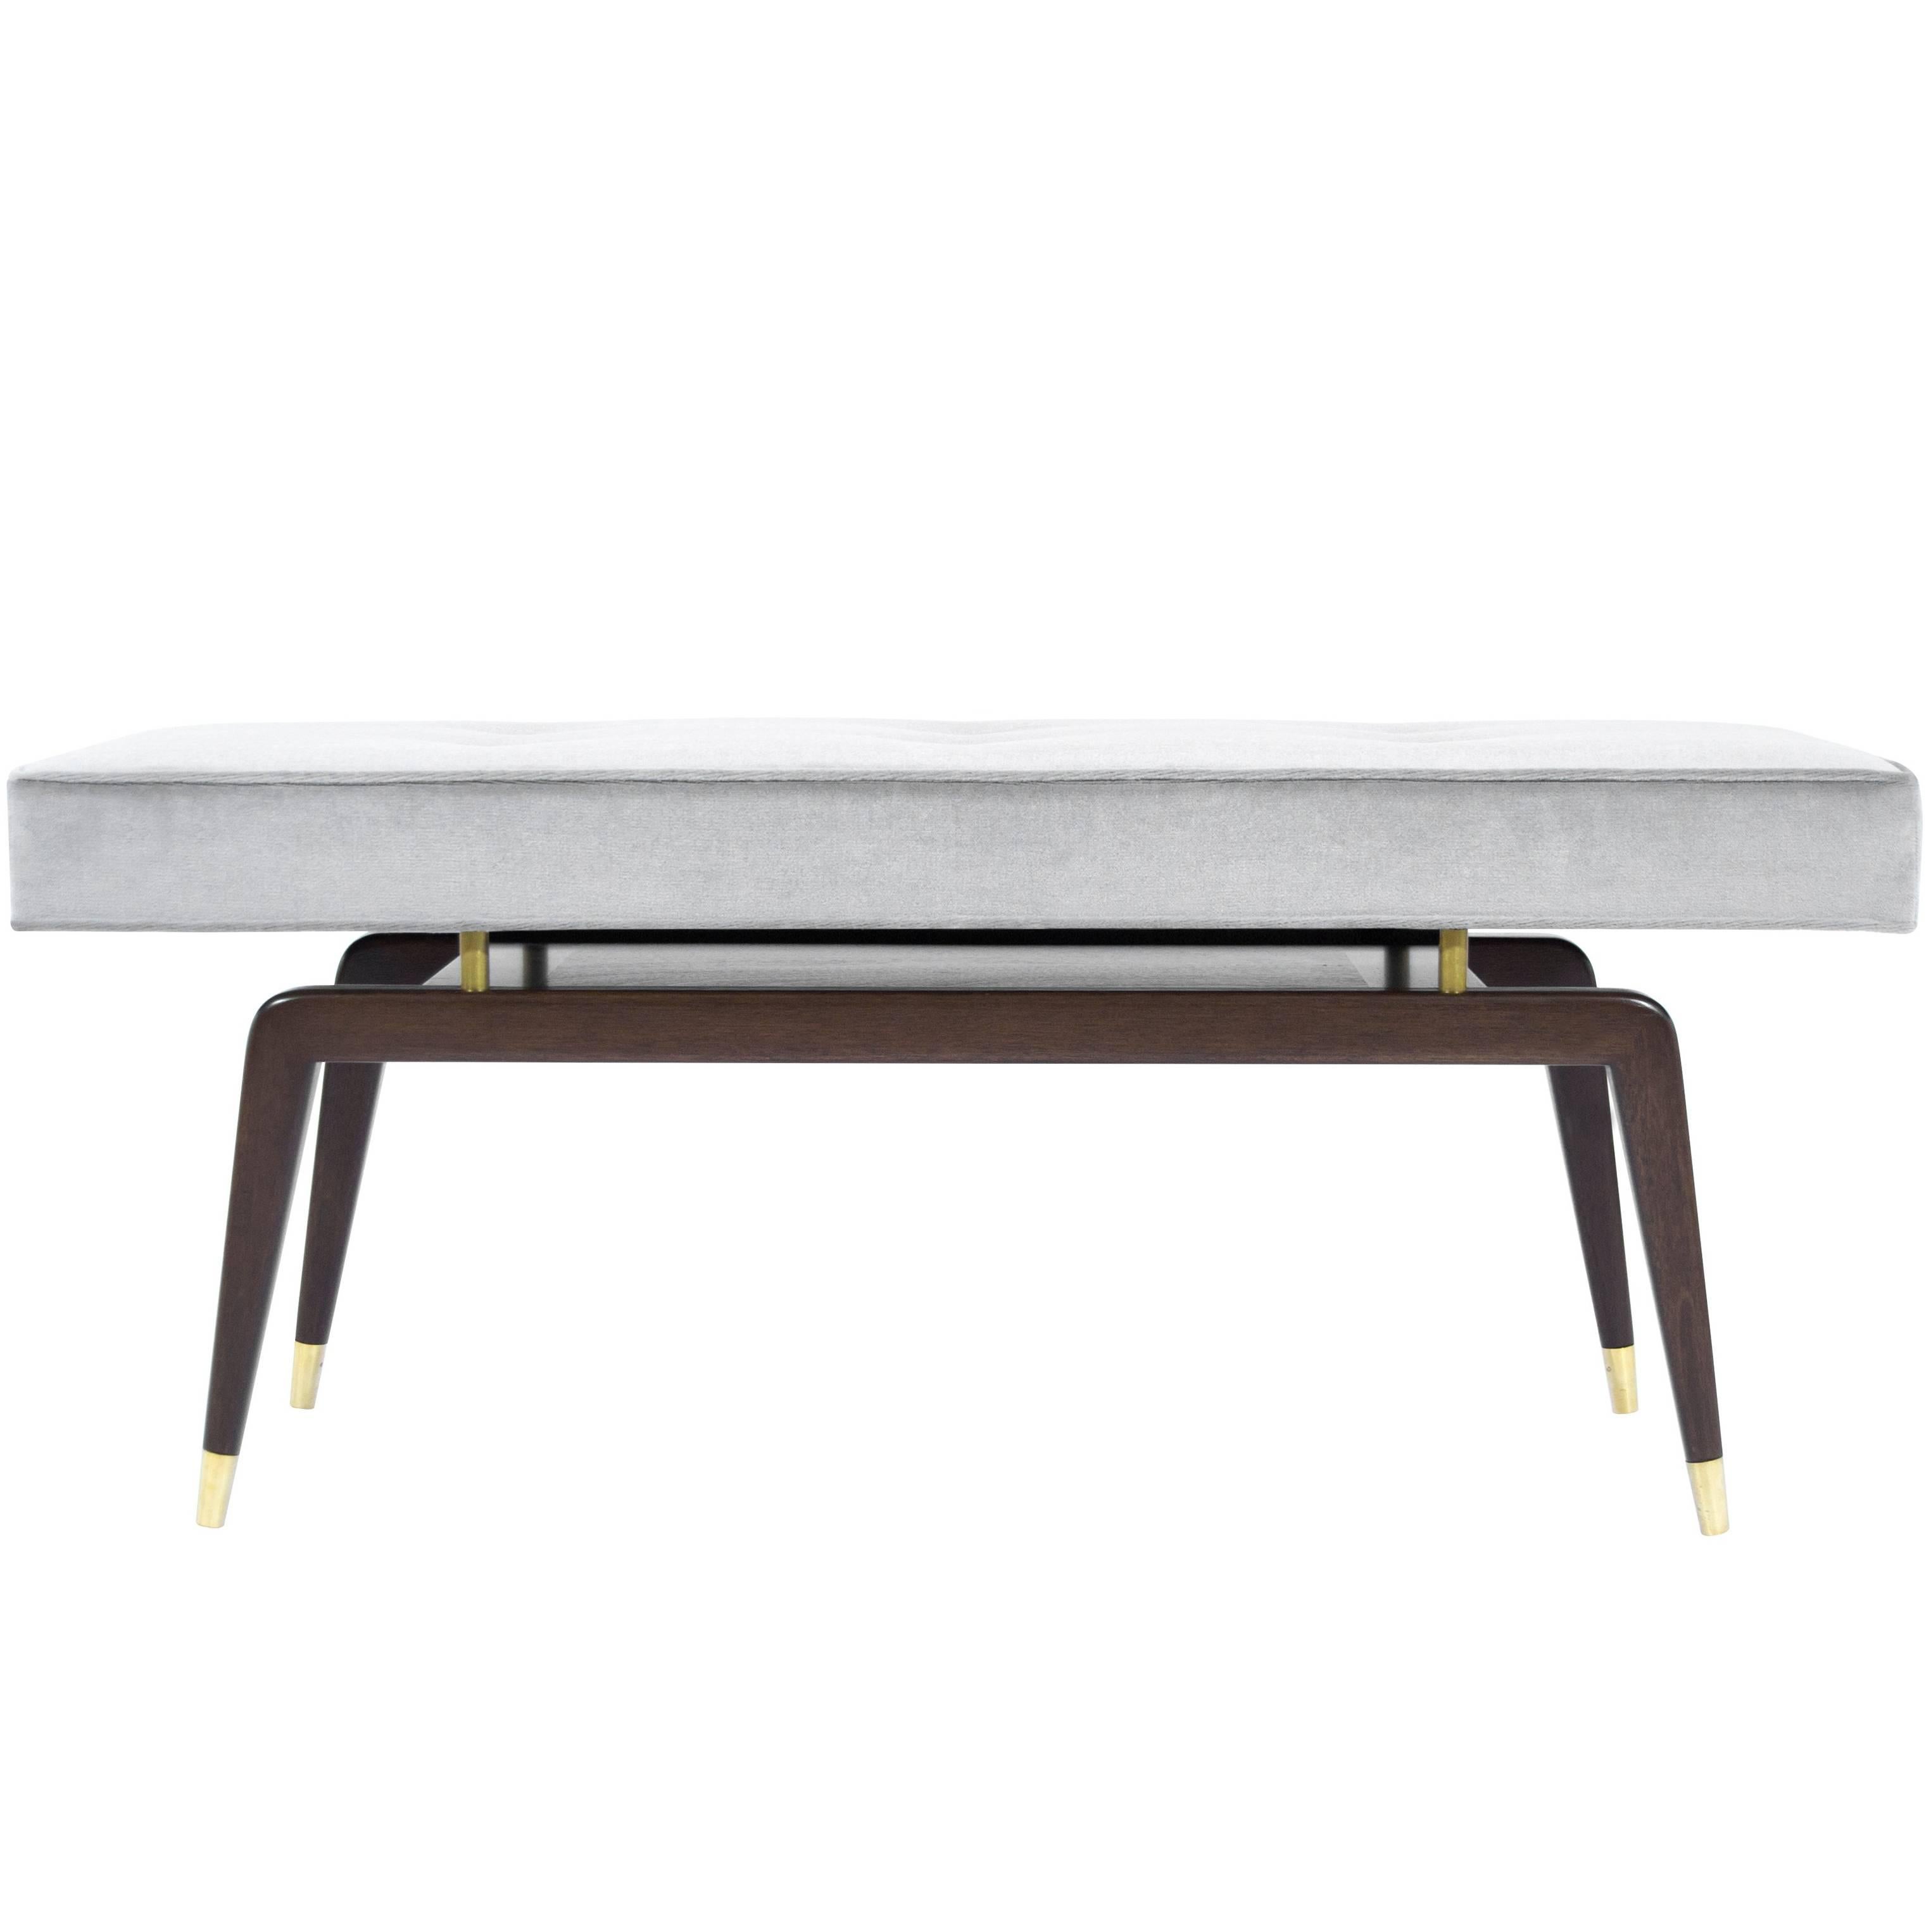 Gio Ponti Style Floating Bench